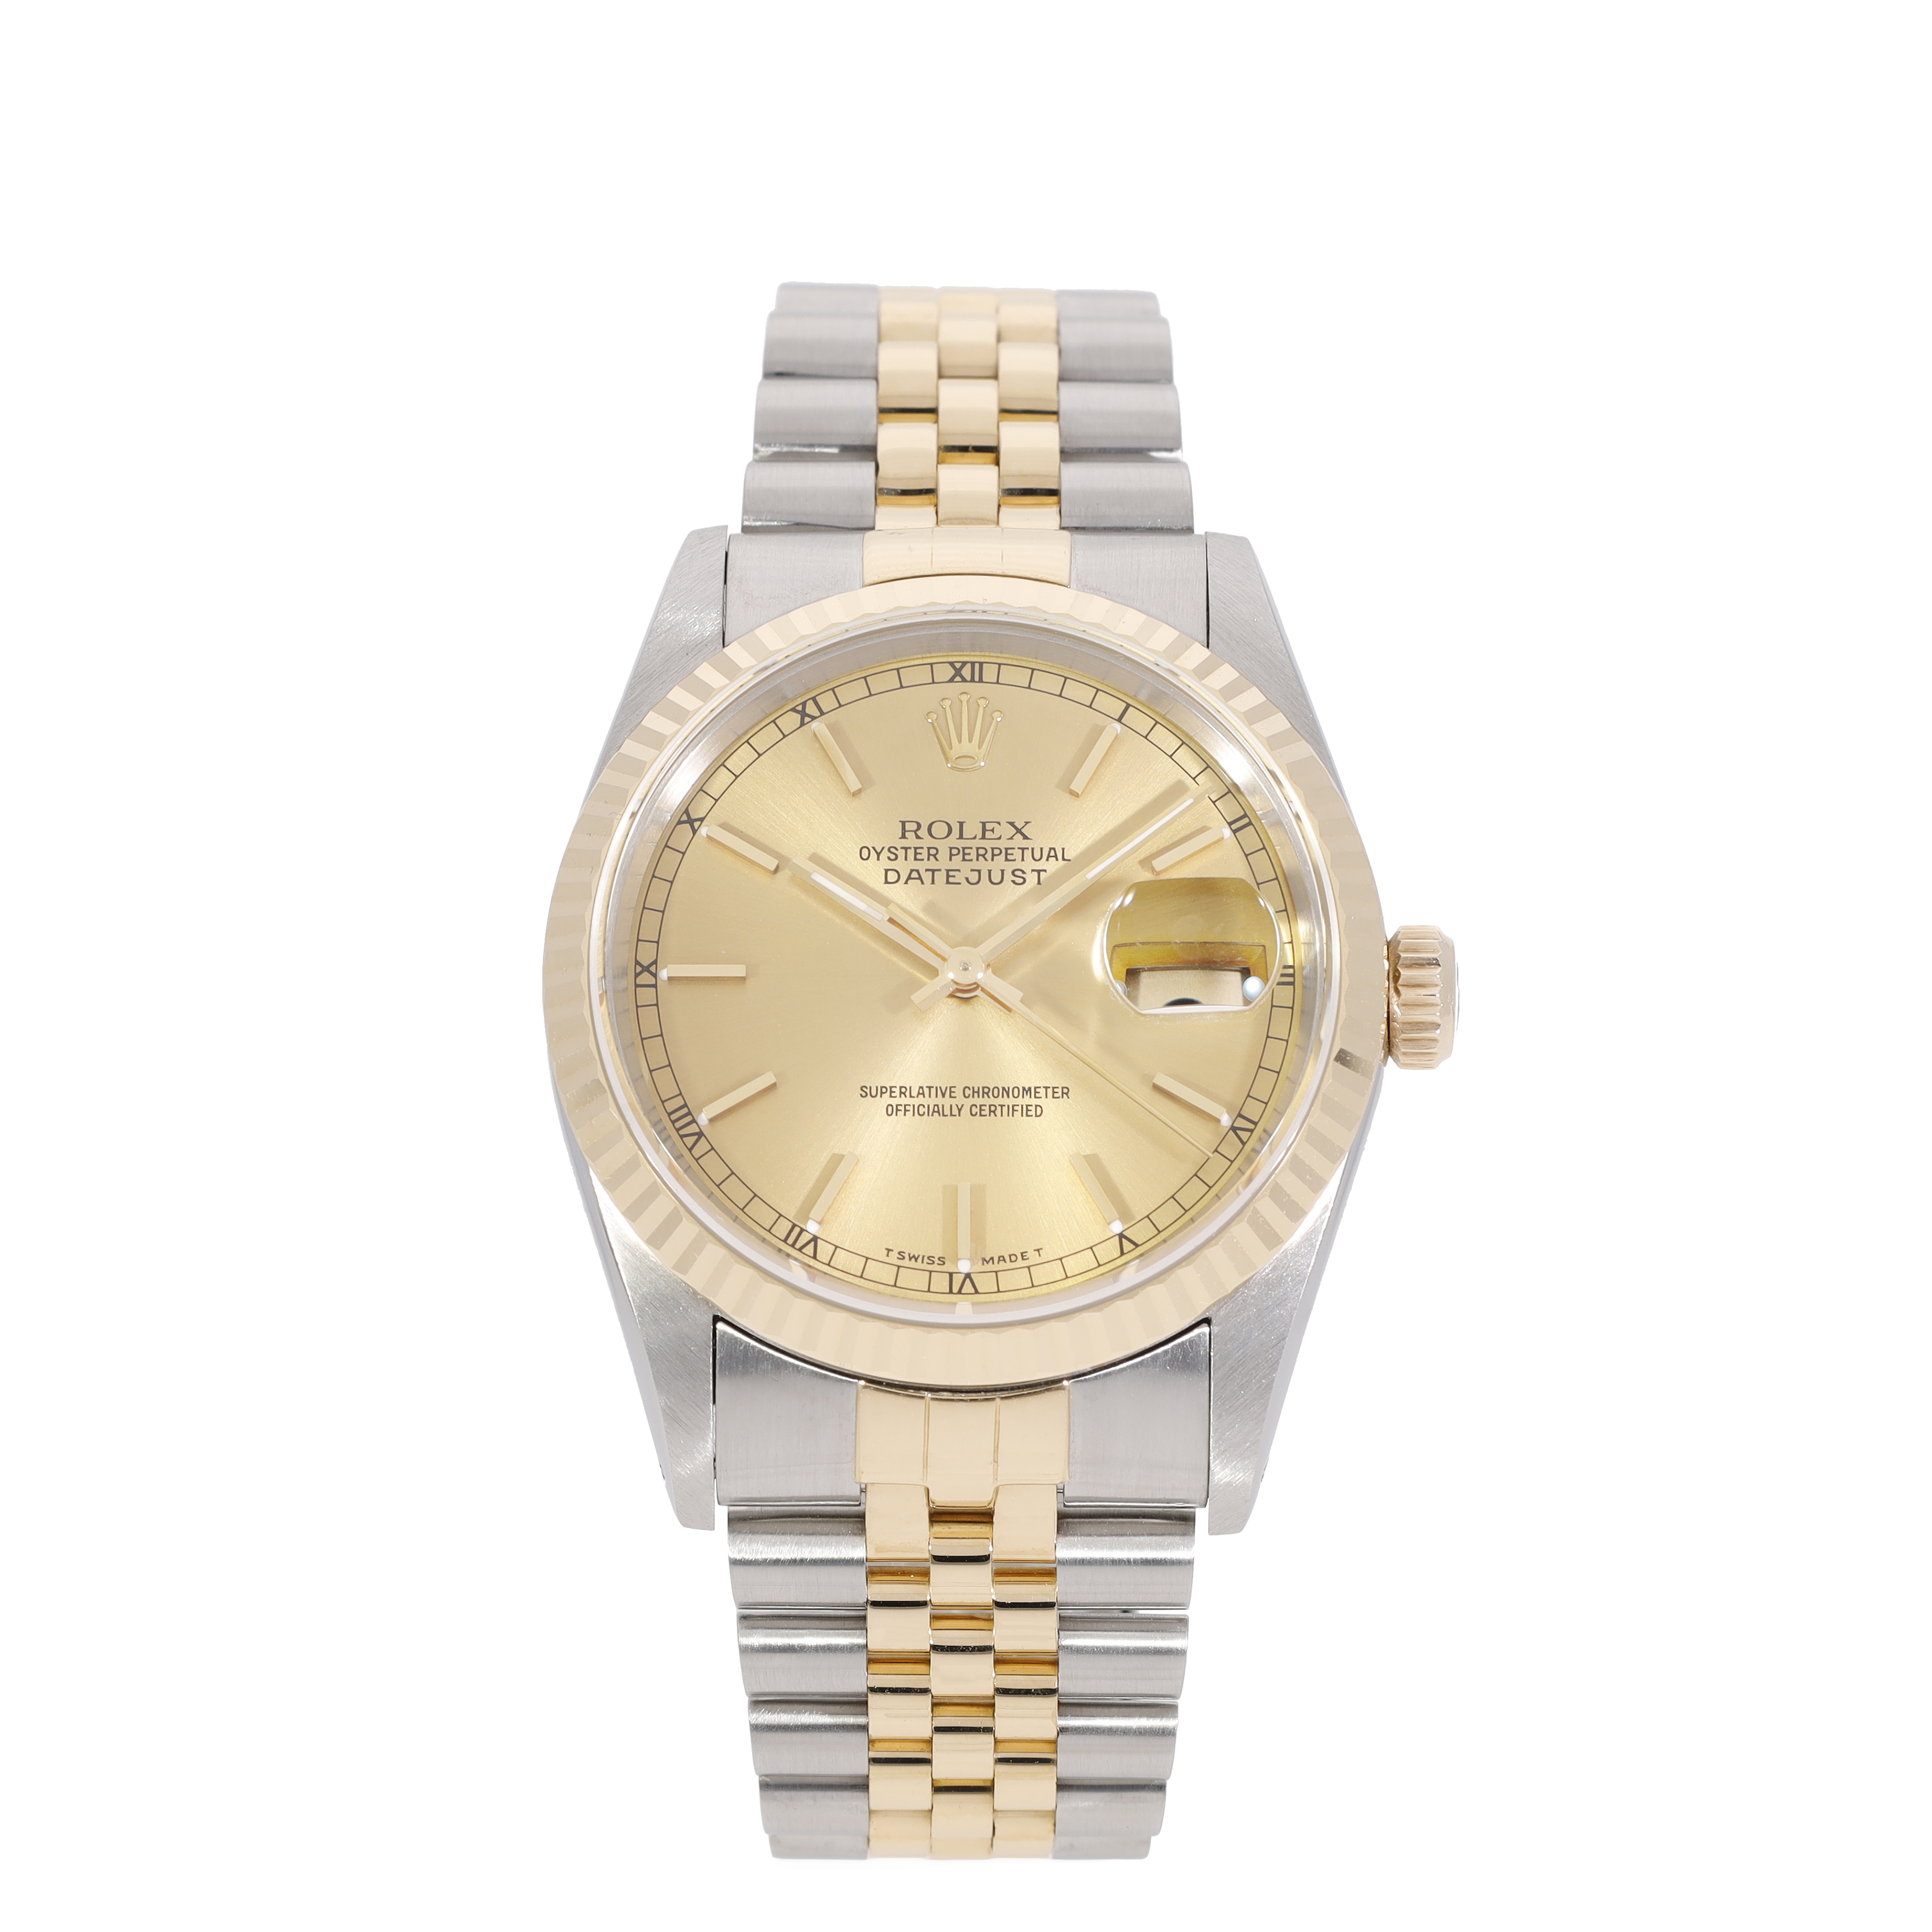 Rolex Datejust 16233 in Stainless Steel Yellow Gold | CHRONEXT